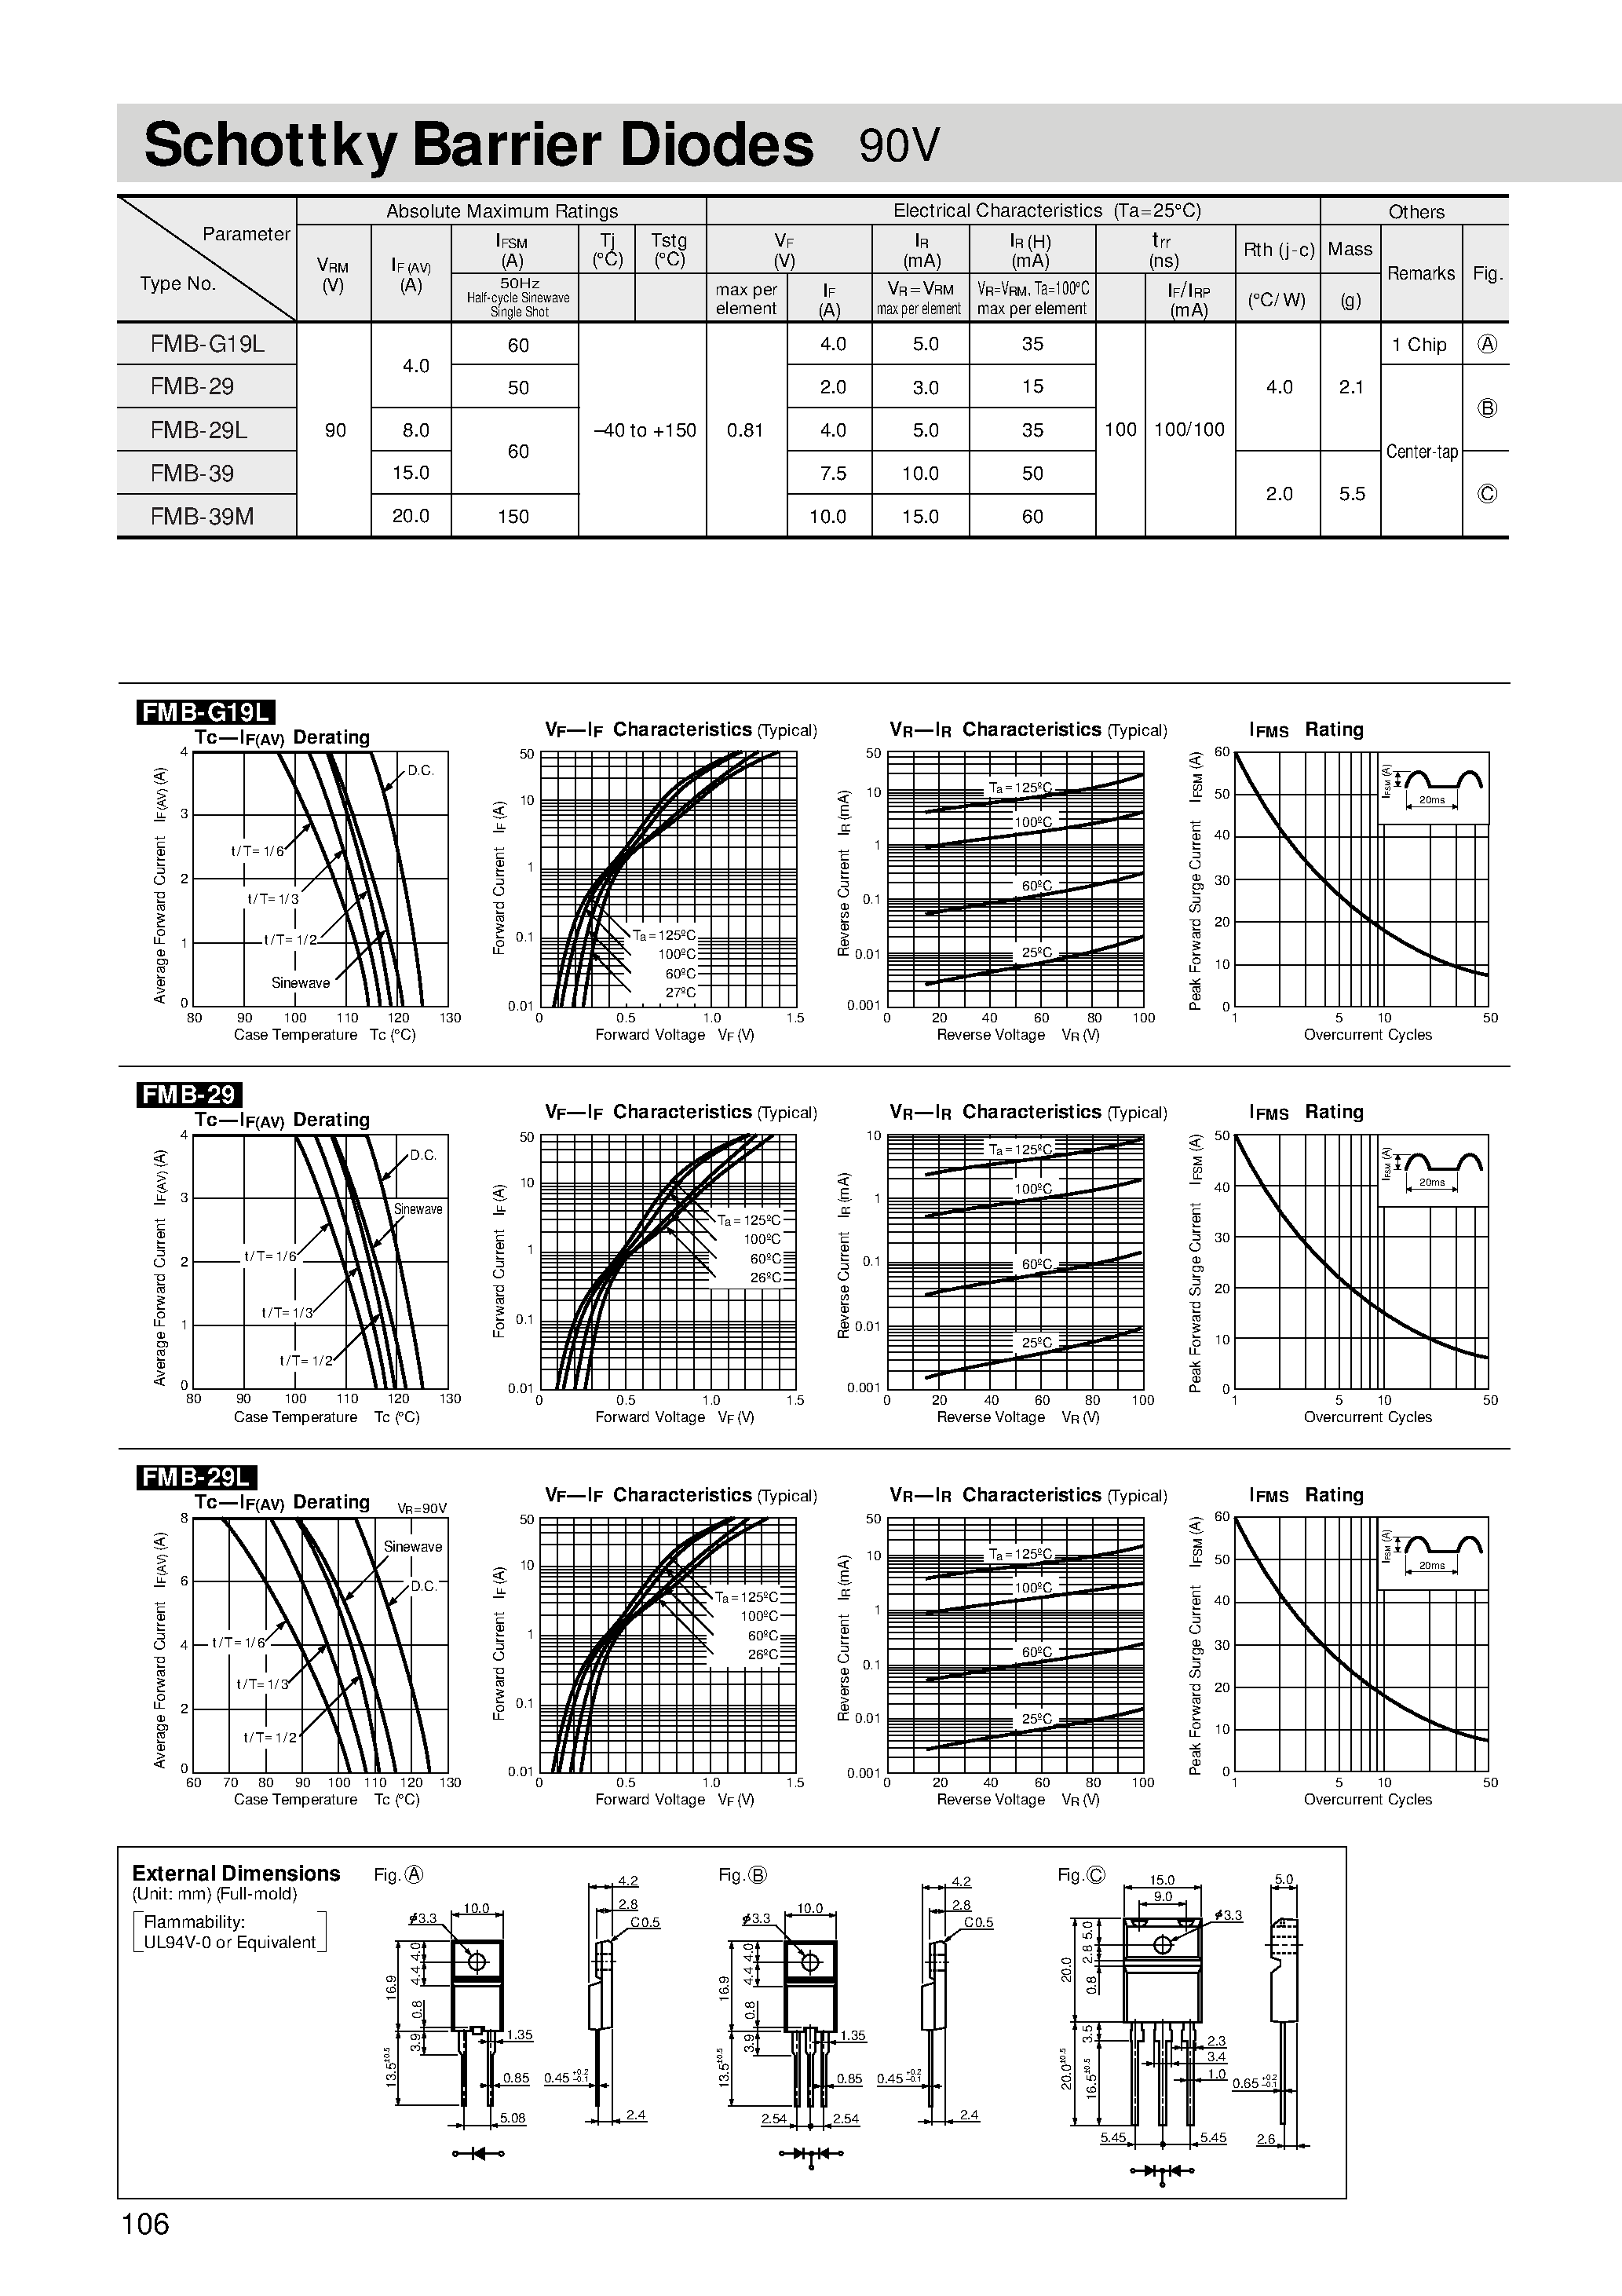 Datasheet FMB-G19 - Schottky Barrier Diodes 90V page 1